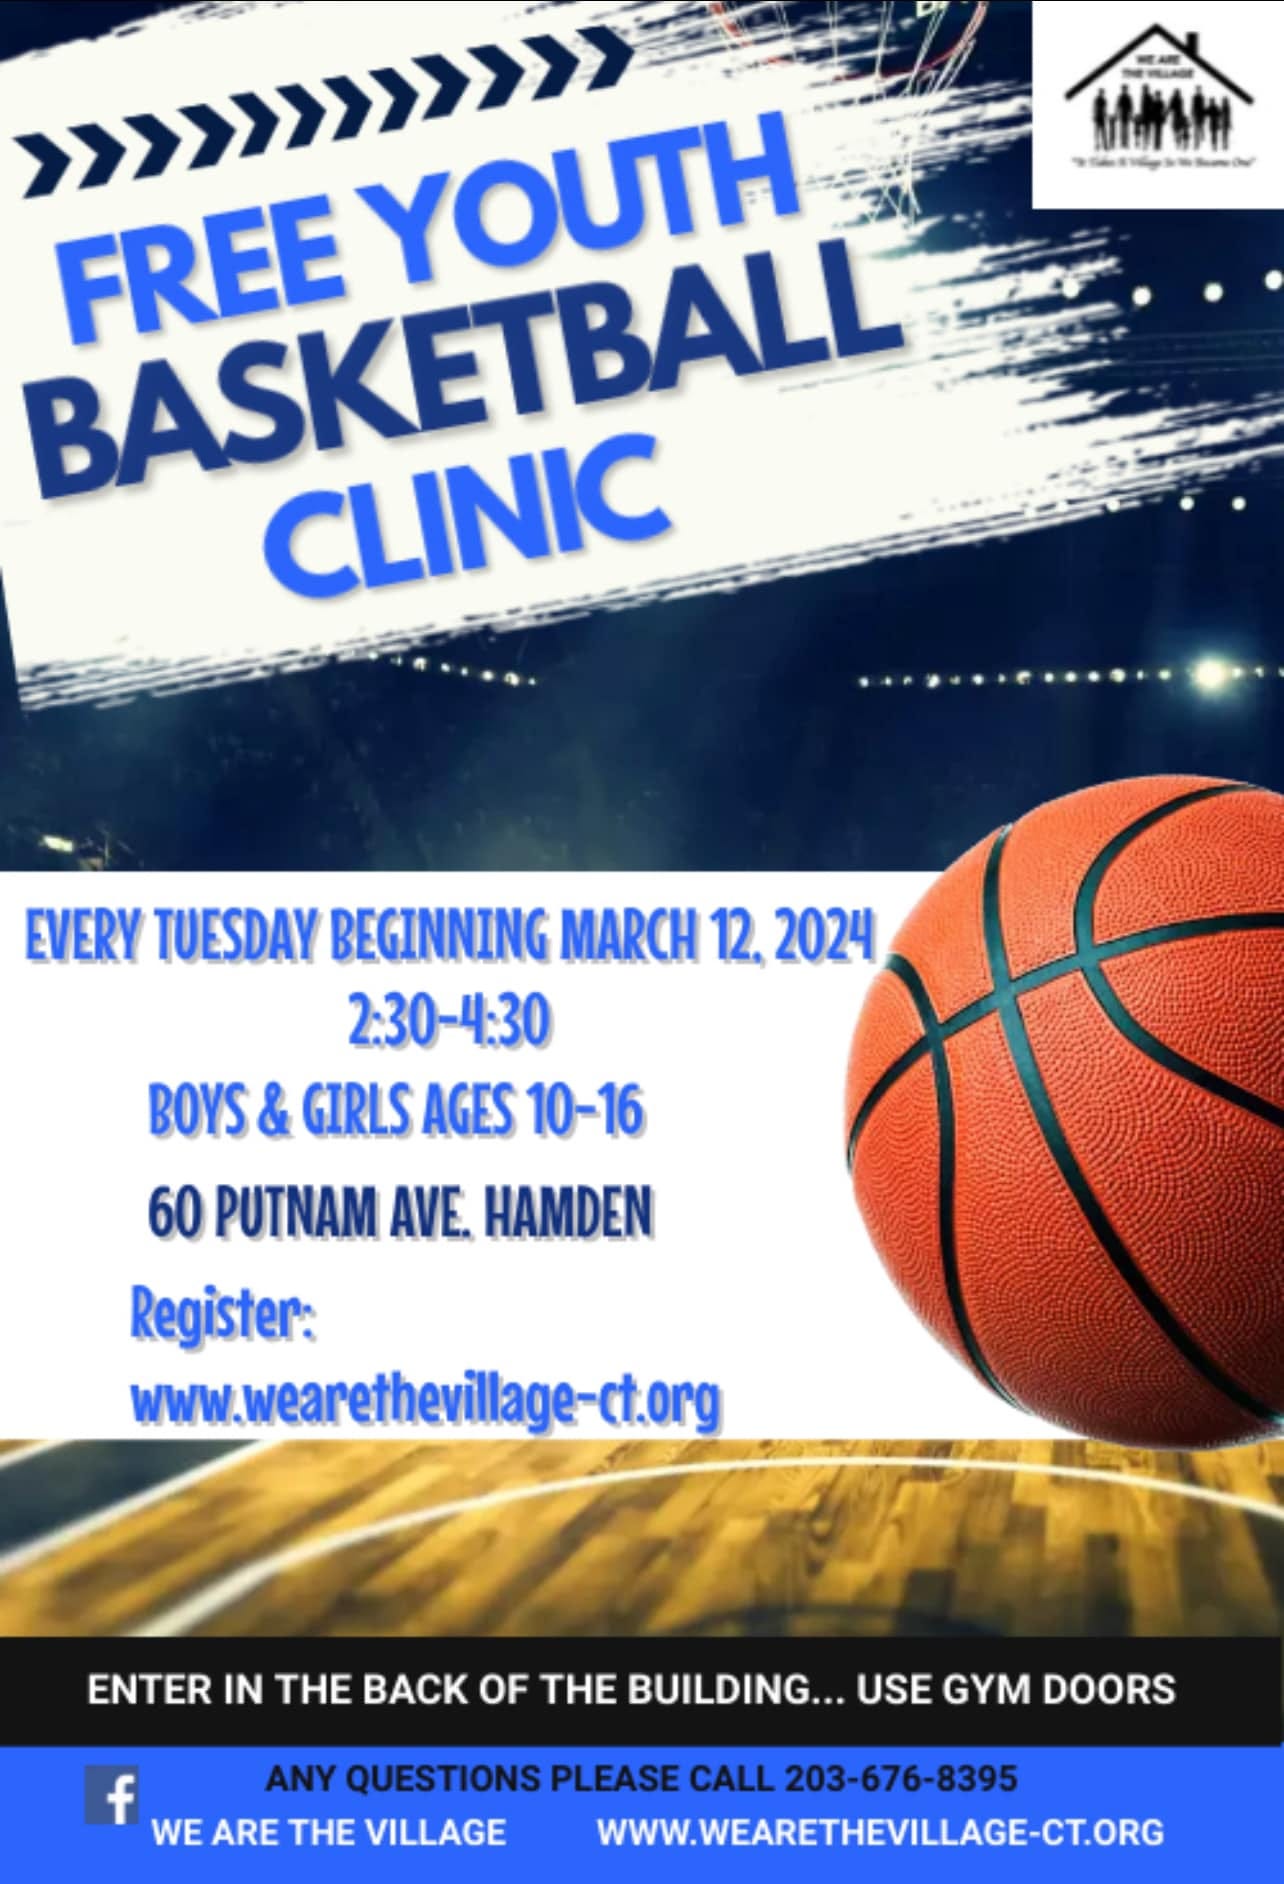 May be an image of basketball and text that says '> BASKETBALL FREE CLINIC EVERY TUESDAY BEGINNING MARCH 12. 2024 2:30-4:30 BOYS & GIRLS AGES 10-16 60 PUTNAM AVE. HAMDEN Register: www.wearethevillage-ct.org ENTER IN THE BACK OF THE BUILDING... USE GYM DOORS f WE ARE THE VILLAGE L PLEASE QUESTIONS 203-676-8395 WWW.WEARETHEVILLAGE-CT.OR'